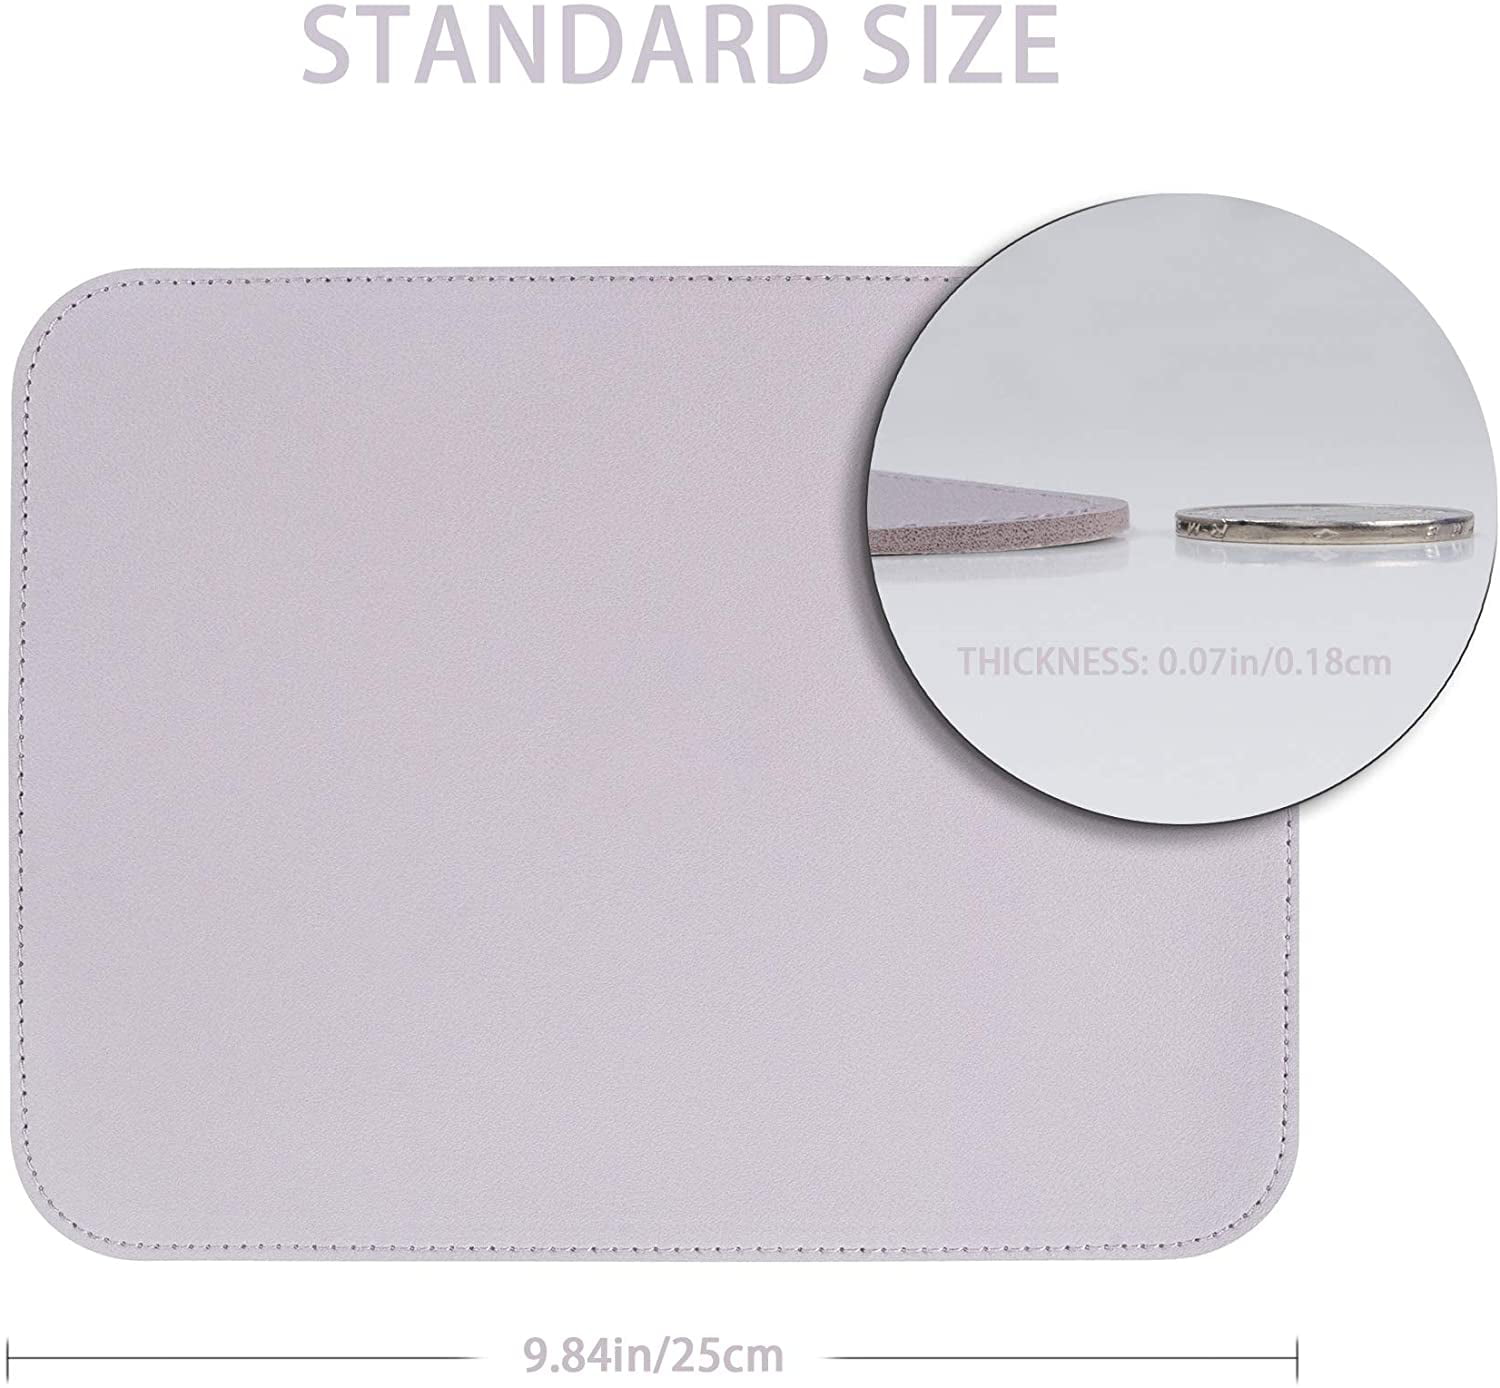 Ultra Thin Waterproof PVC Leather Mouse Pad,Stitched Edges,Works for Computers Pink, 8.66 YSAGI Mouse Pads Pack with Non-Slip Laptop 